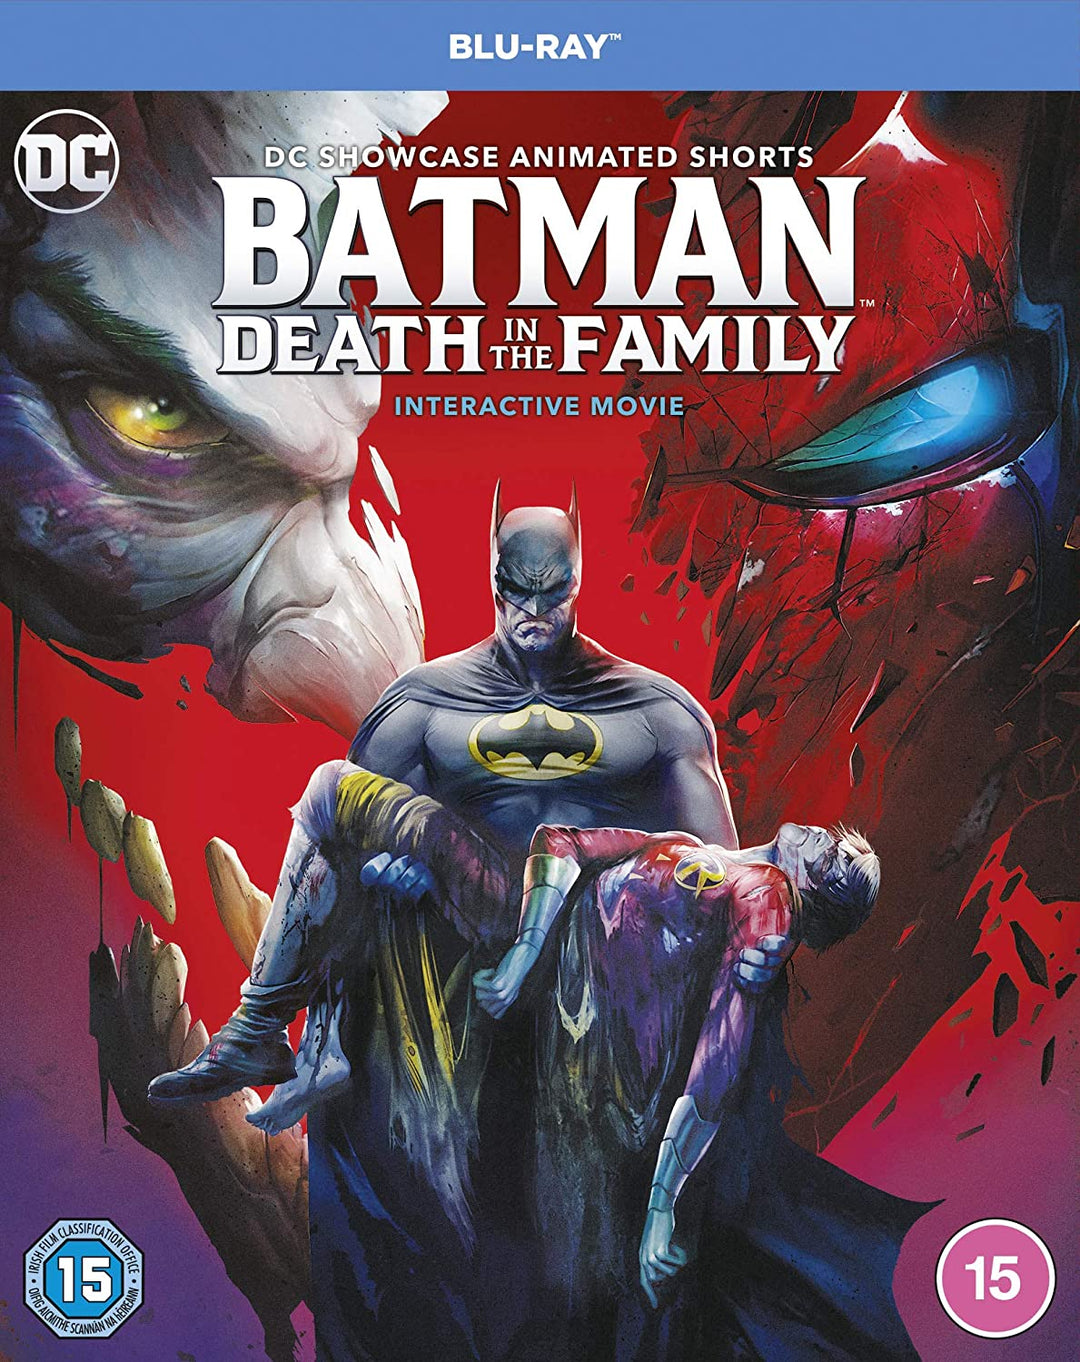 Batman: Death in the Family [2019] [Region Free] - Action/Animation [Blu-ray]